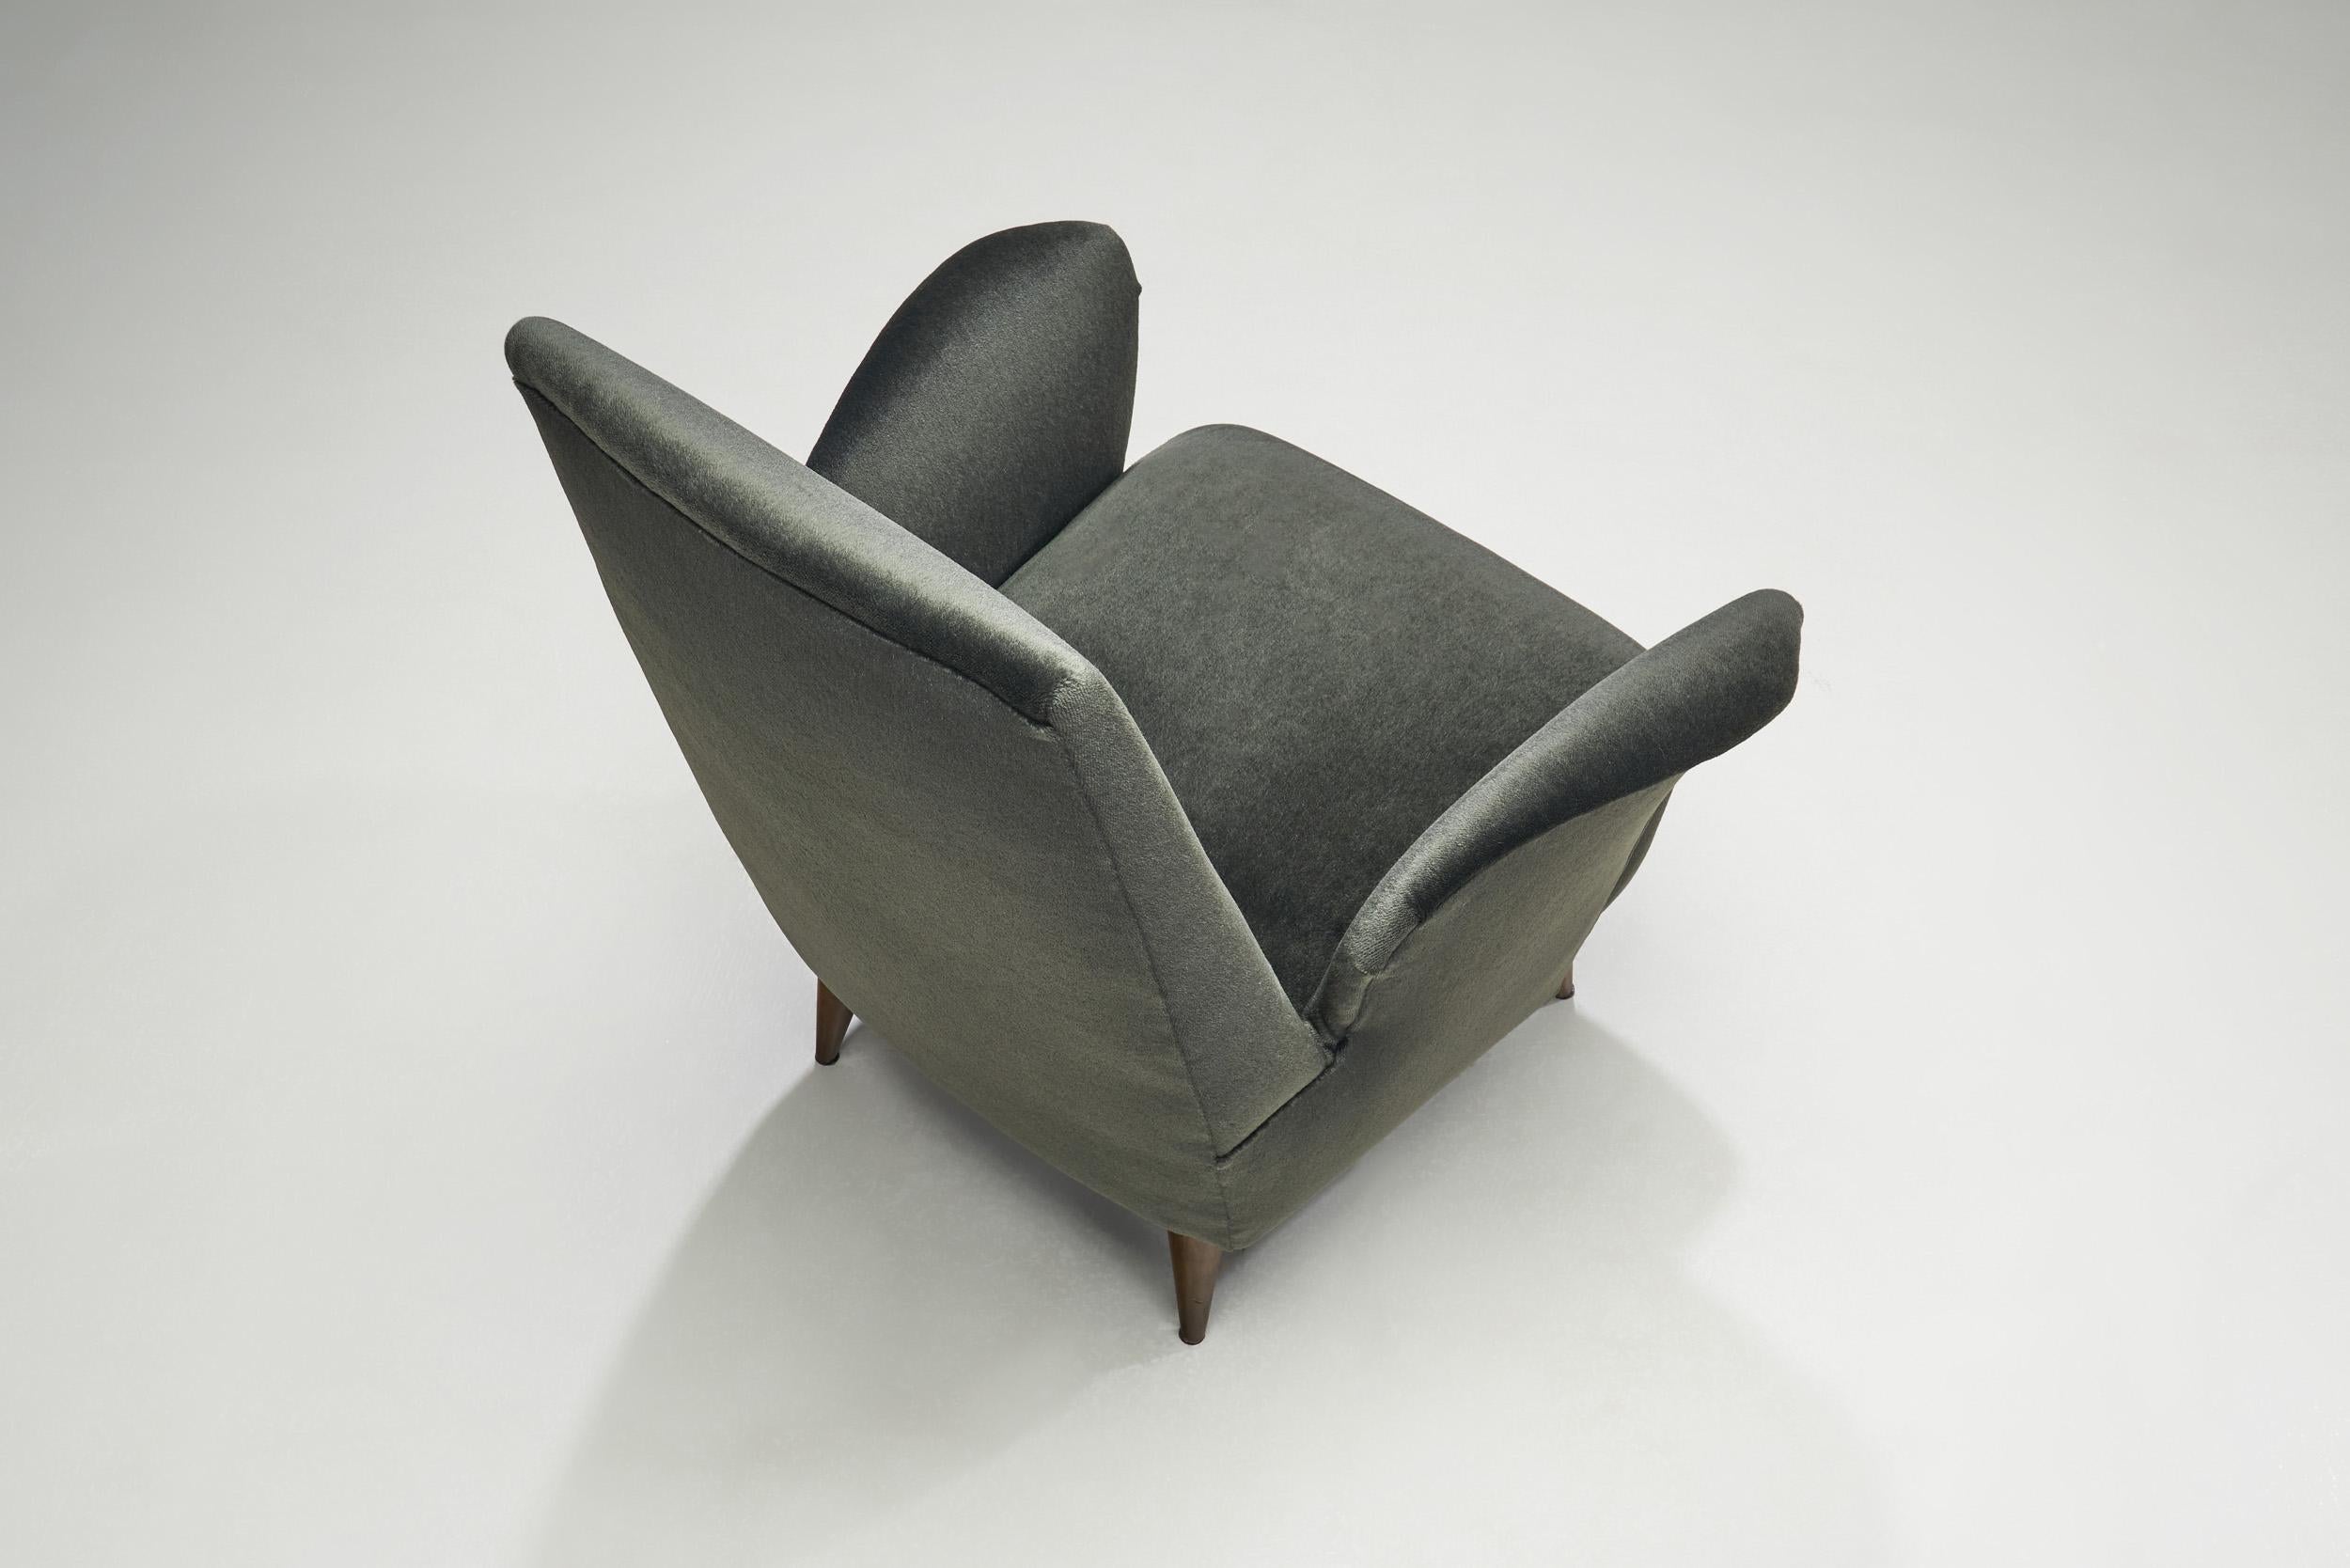 Mid-20th Century Sculptural Lounge Chairs by Nino Zoncada for Frimar, Italy 1950s For Sale